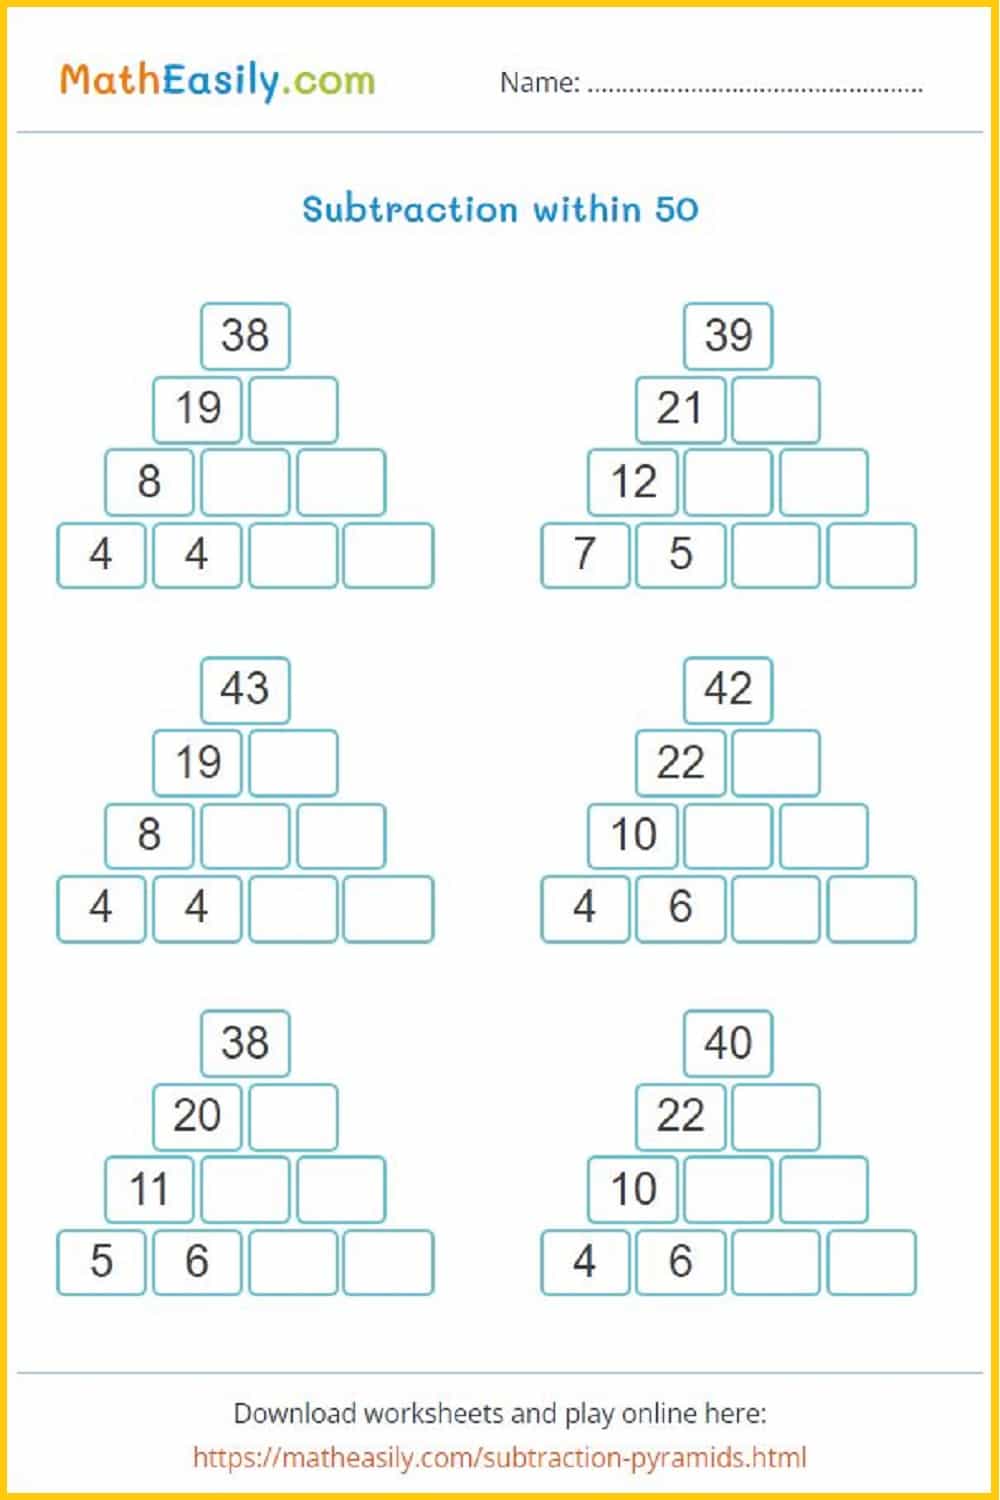 Subtraction puzzle worksheets. Printable subtraction number pyramid worksheets in PDF. missing number pyramid puzzle.